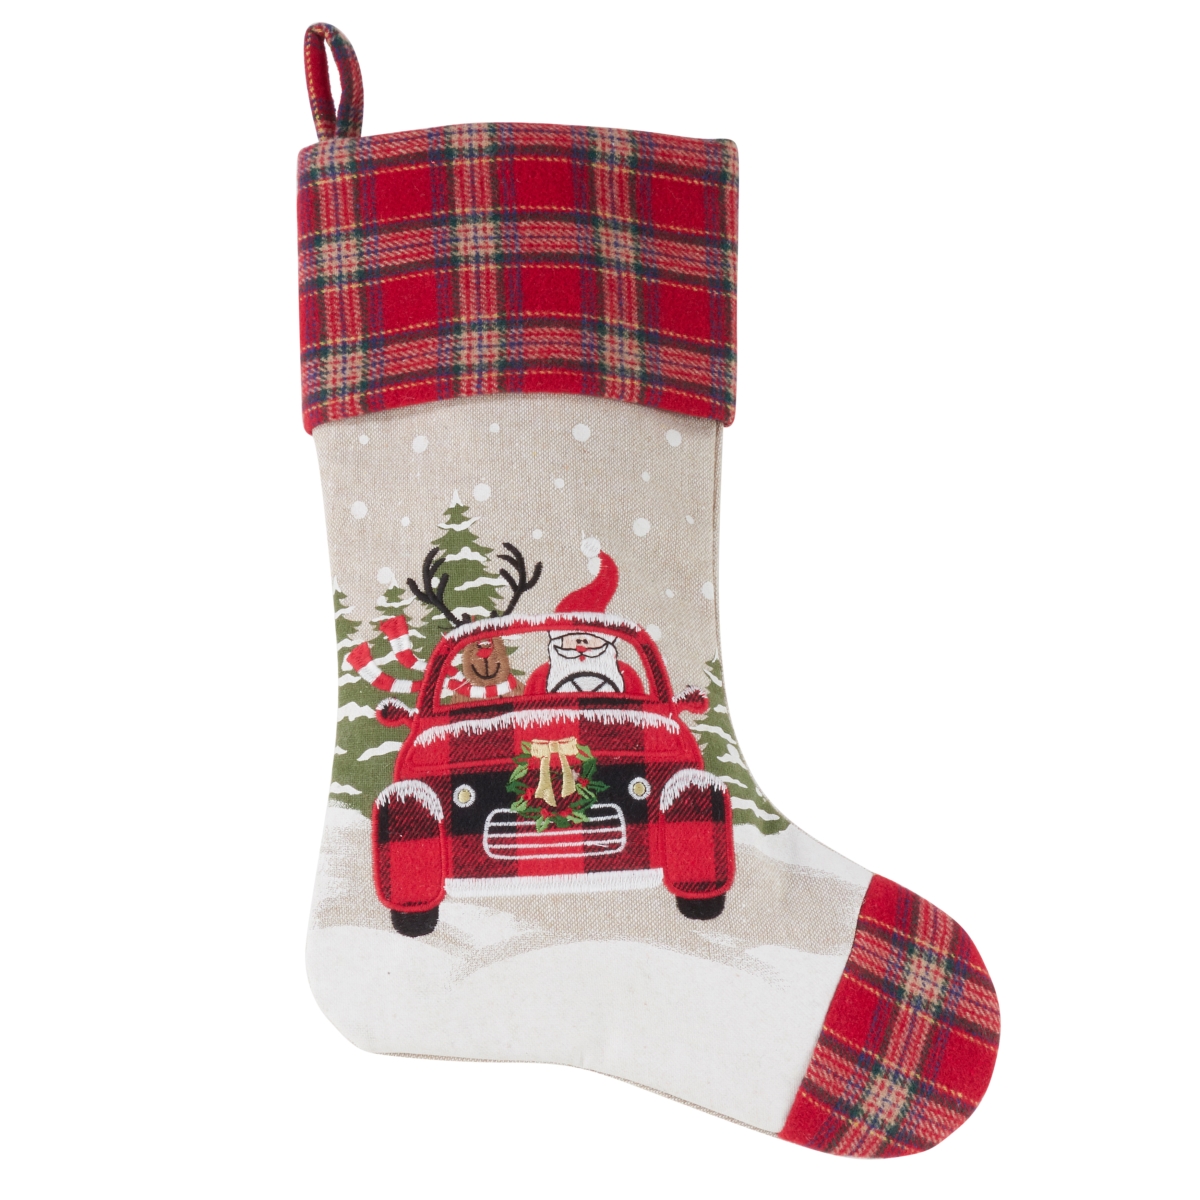 UPC 789323339850 product image for 7752.M1620 16 x 20 in. Santa & Reindeer Car Design Holiday Stocking - Multi Colo | upcitemdb.com